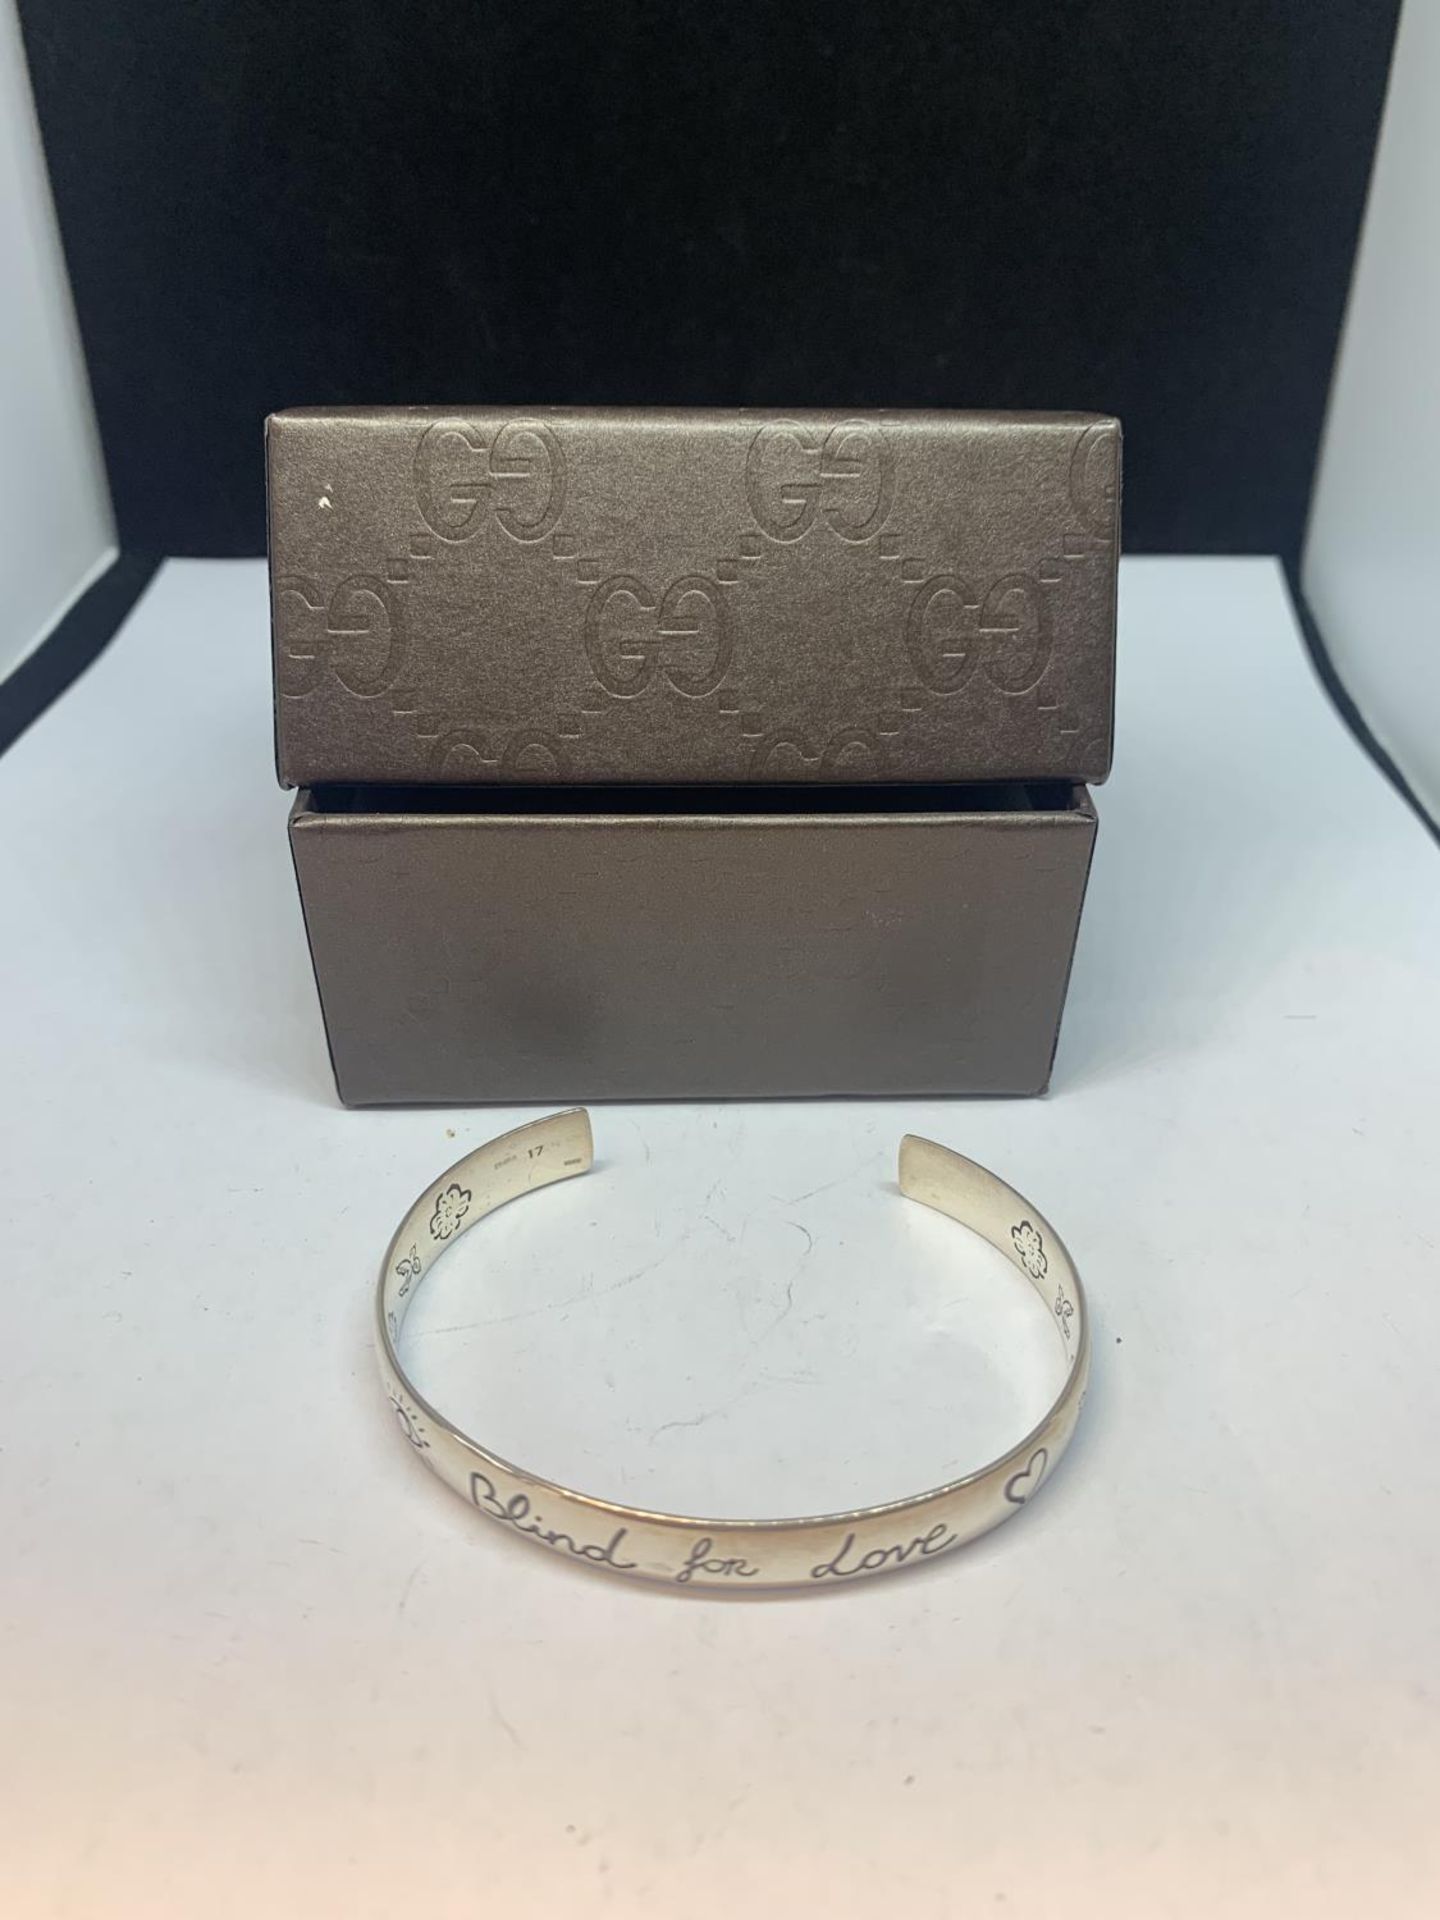 A GUCCI BLIND FOR LOVE BANGLE WITH A PRESENTATION BOX